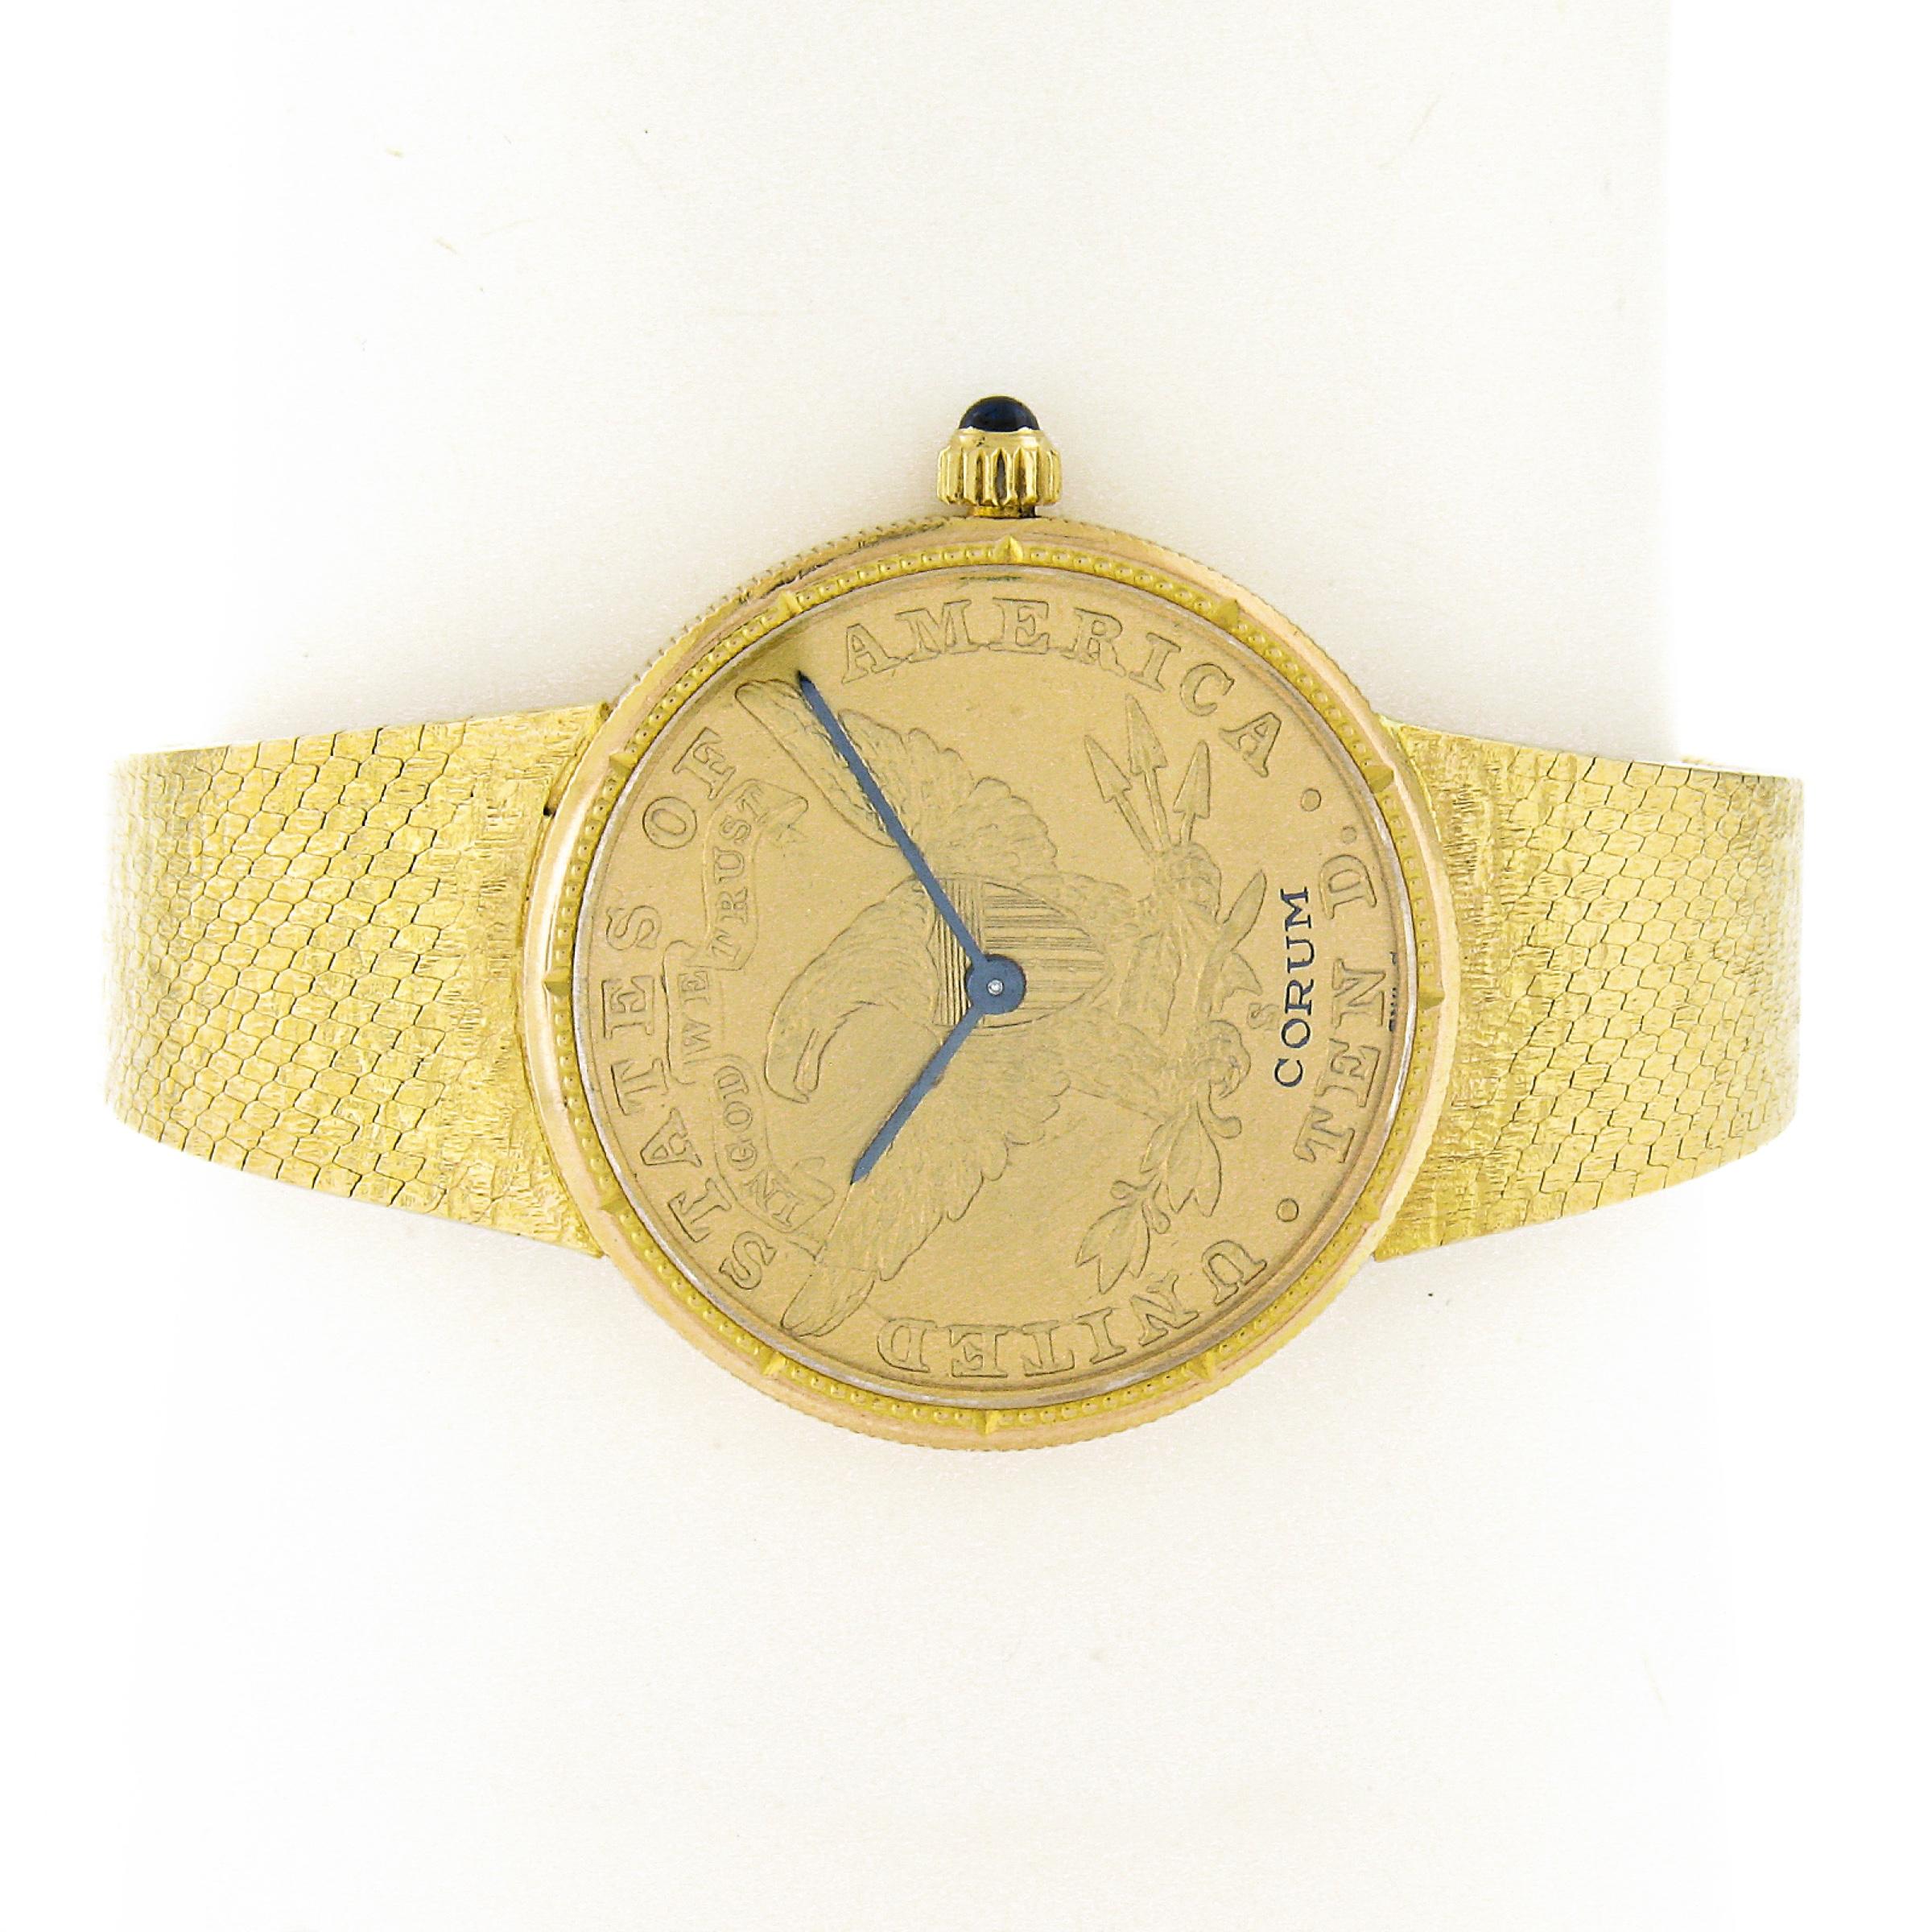 Watchmaker: Corum
Movement: Swiss Made Hand Wound Mechanical Movement
Case Material: Solid 18k Yellow Gold
Case Size: 28mm (not including crown)
Bracelet:	Solid 18k Gold
Length: Slightly adjustable - Will fit up to a 6.25 inch wrist.
Gross